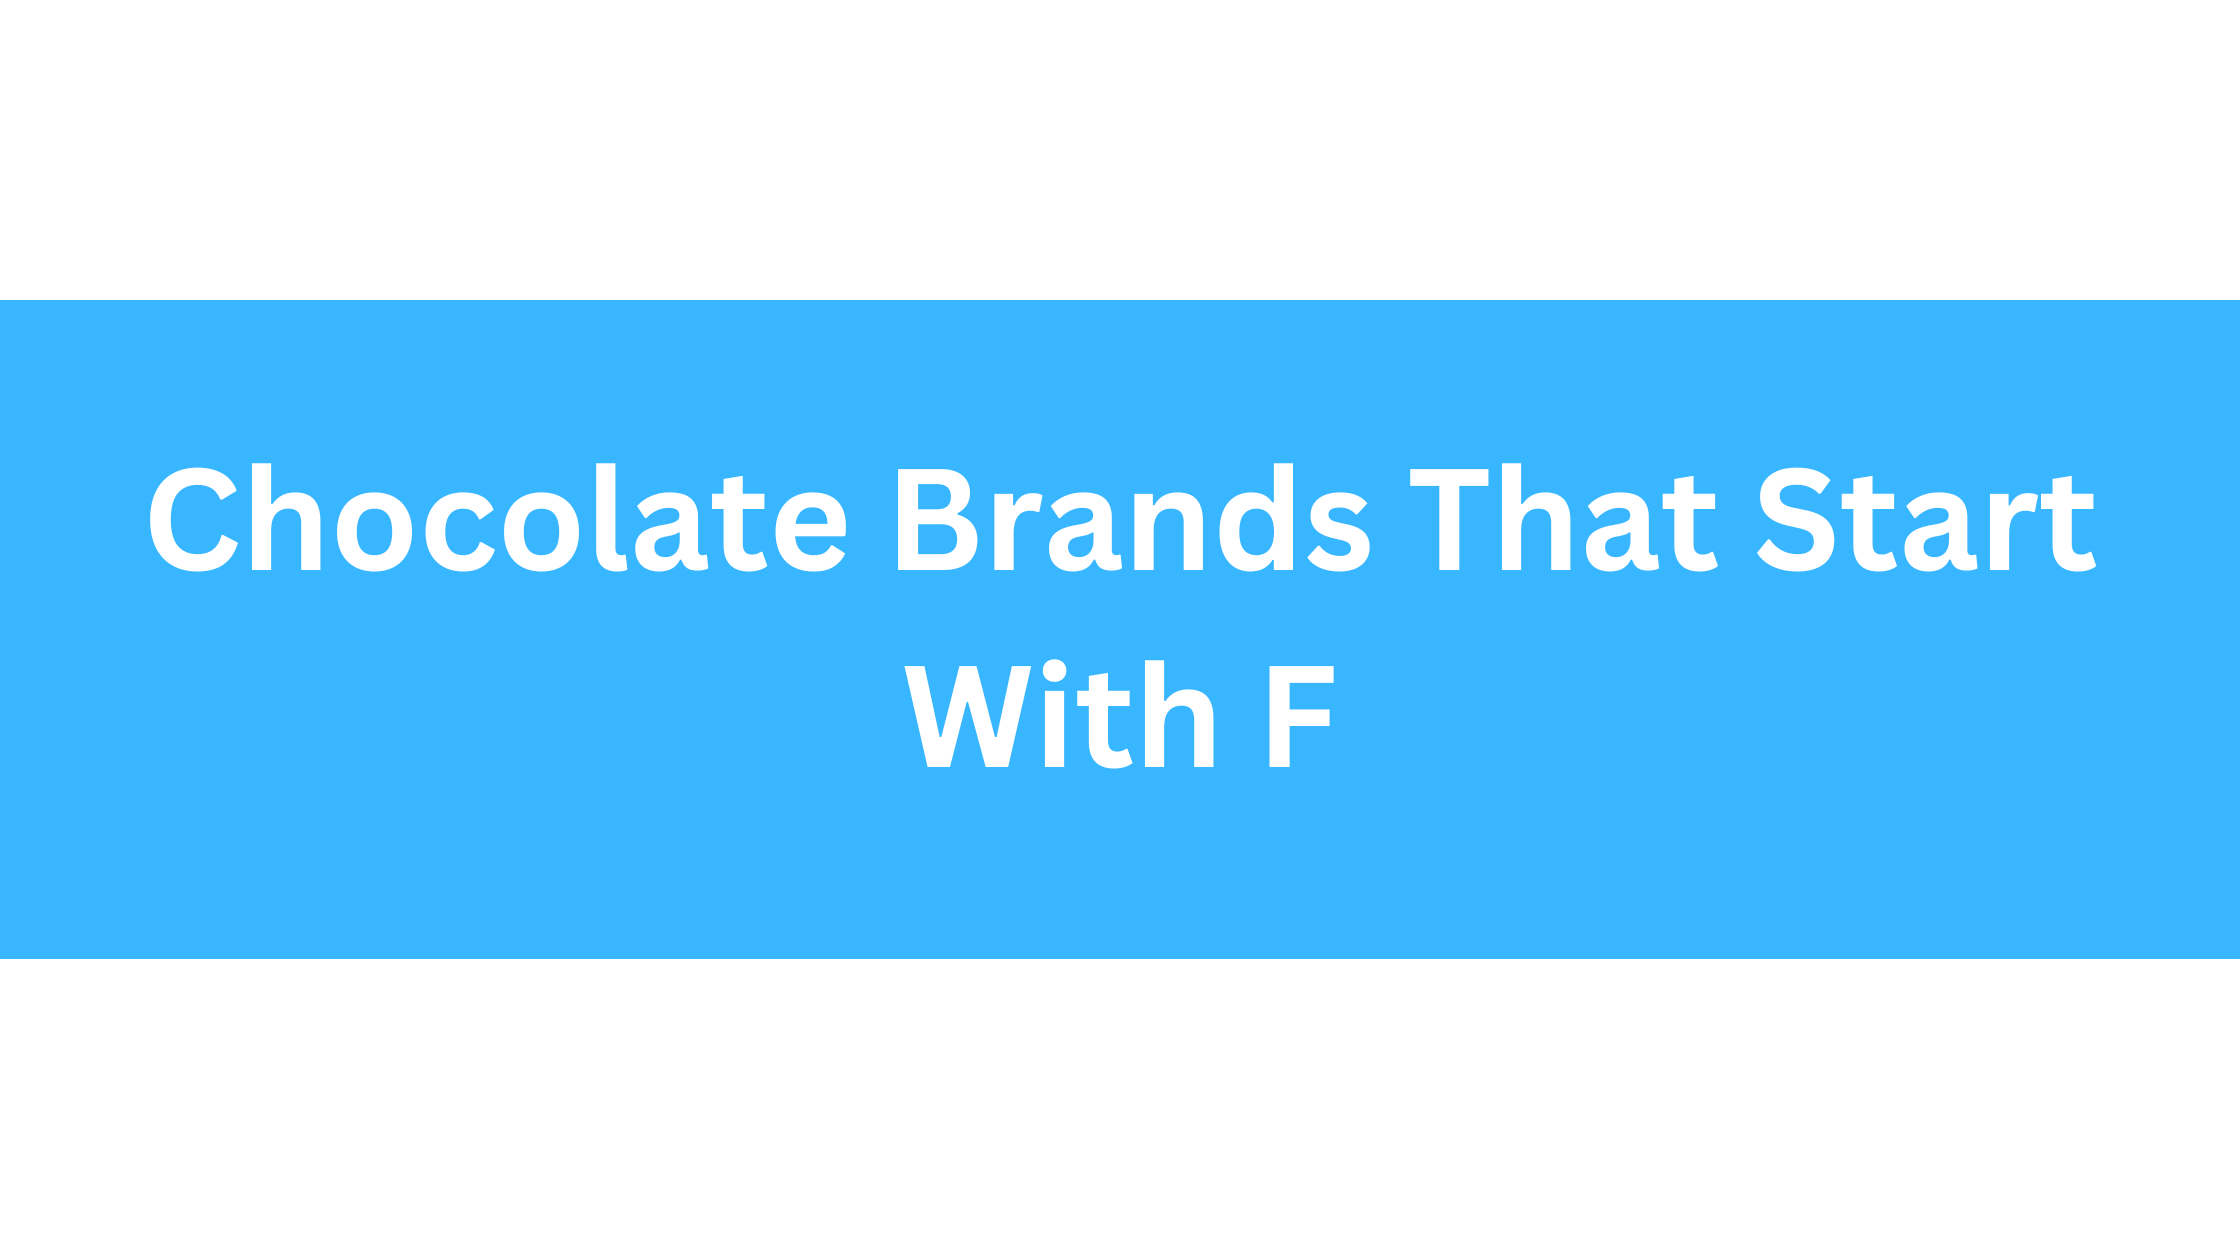 Chocolate Brands That Start With F